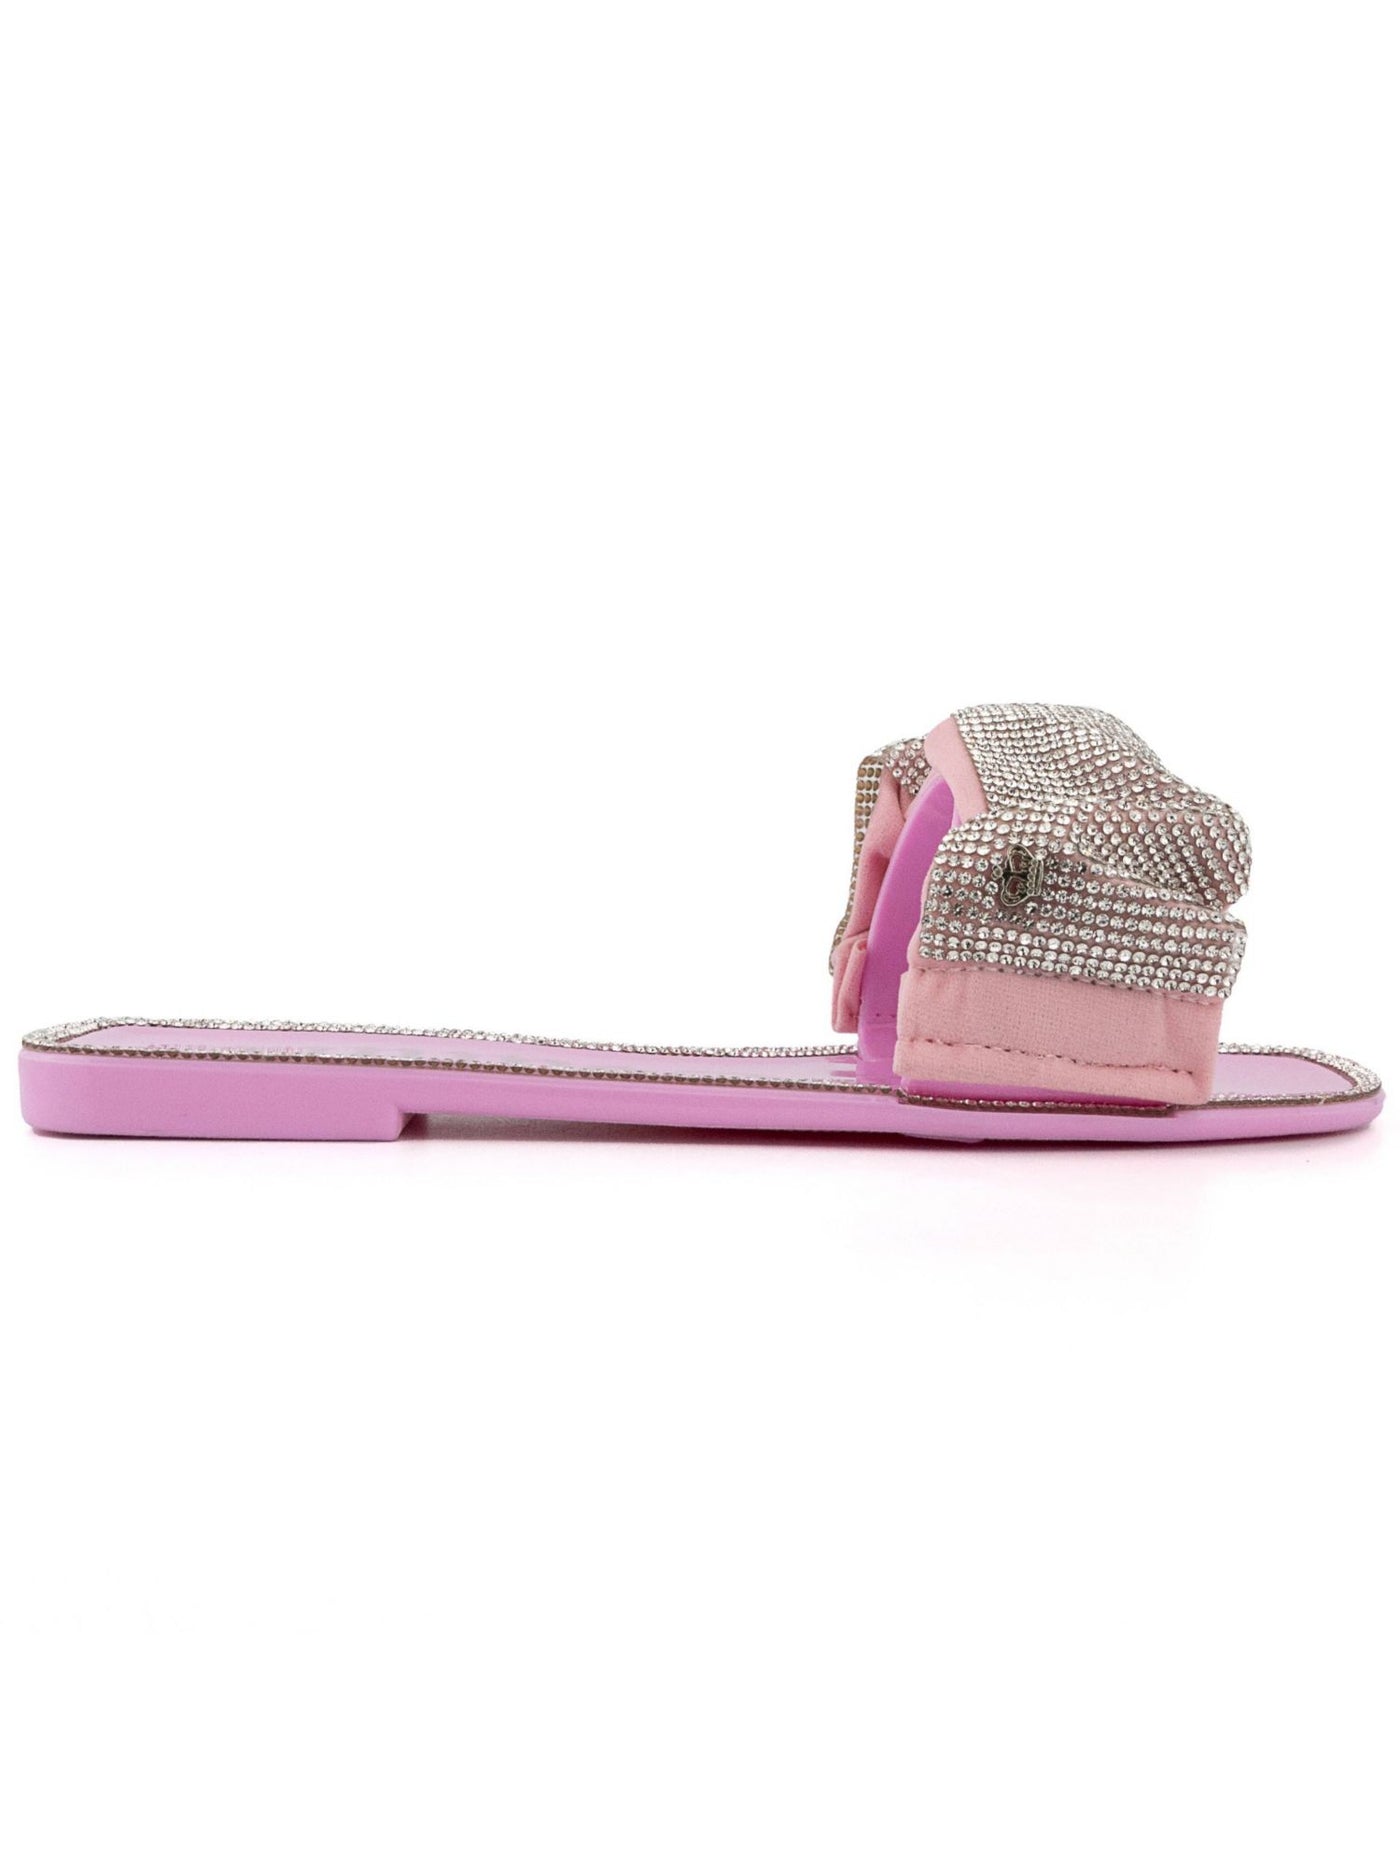 JUICY COUTURE Womens Pink Mixed Media Metallic Logo Embellished Hollyn Round Toe Slip On Slide Sandals Shoes 8 M